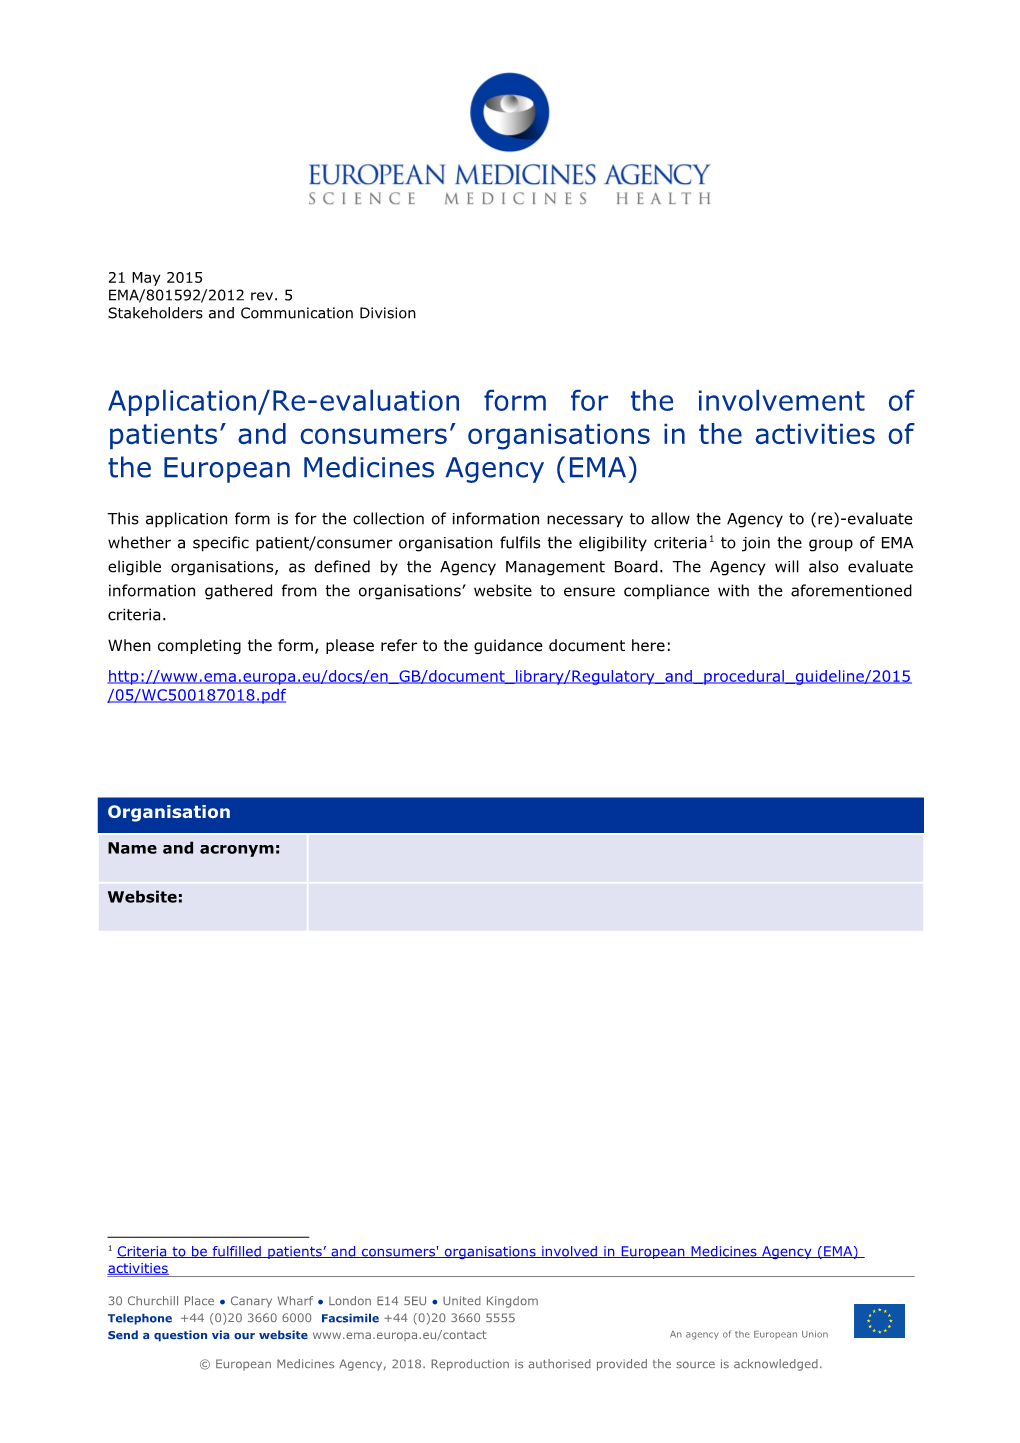 Application/Re-Evaluation Form for the Involvement of Patients and Consumers Organisations